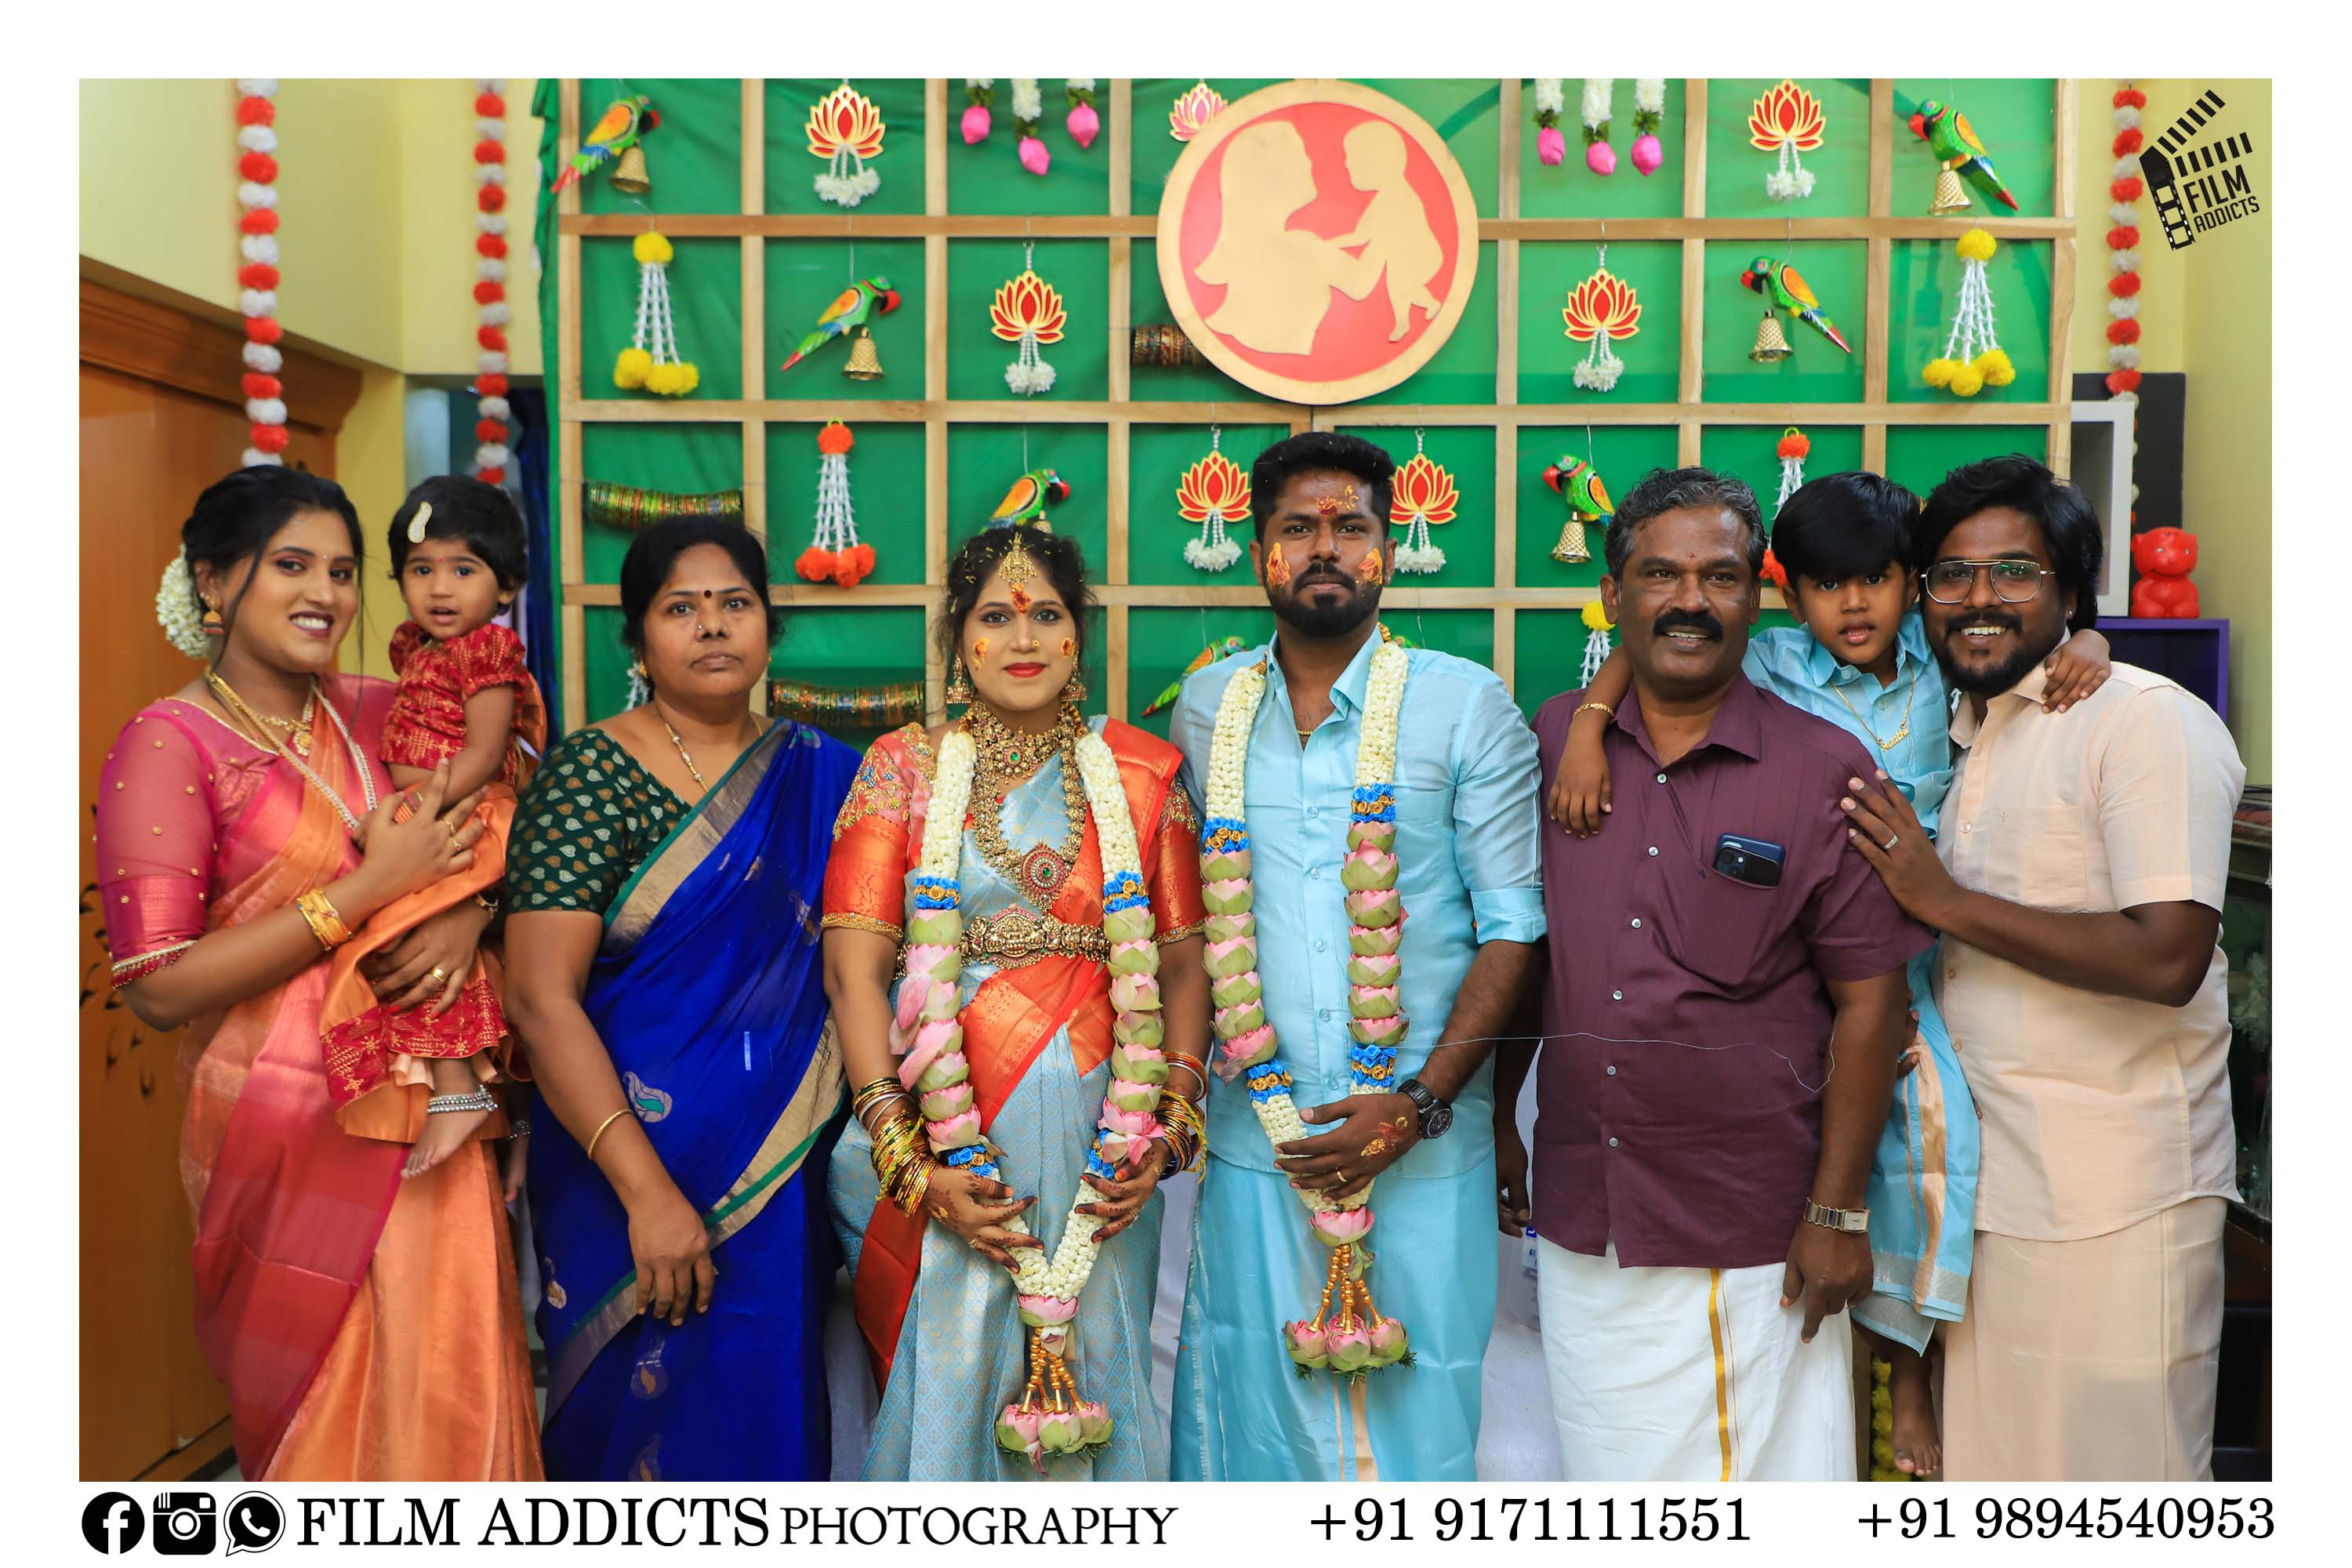 Best Baby Shower Photography in Thanjavur-FilmAddicts Photography,best Wedding photographers in Thanjavur,best candid photographers in Thanjavur,best Wedding photography in Thanjavur,best candid photography in Thanjavur, Best Wedding candid Photographers in Thanjavur, best marriage photographers in Thanjavur,best marriage photography in Thanjavur,best photographers in Thanjavur,best photography in Thanjavur,best Wedding candid photography in Thanjavur,best Wedding video in Thanjavur,best Wedding videographers in Thanjavur,best Wedding videography in Thanjavur,best candid videographers in Thanjavur,best candid videography in Thanjavur,best marriage videographers in Thanjavur,best marriage videography in Thanjavur,best videographers in Thanjavur,best videography in Thanjavur,best Wedding candid videography in Thanjavur,best Wedding candid videographers in Thanjavur,best helicam operators in Thanjavur,best drone operators in Thanjavur,best Wedding studio in Thanjavur,best professional photographers in Thanjavur,best professional photography in Thanjavur,No.1 Wedding photographers in Thanjavur,No.1 Wedding photography in Thanjavur,Thanjavur Wedding photographers,Thanjavur Wedding photography,Thanjavur Wedding videos,best candid videos in Thanjavur,best candid photos in Thanjavur,best helicam operators photography in Thanjavur,best helicam operator photographers in Thanjavur,best Wedding videography in Thanjavur.